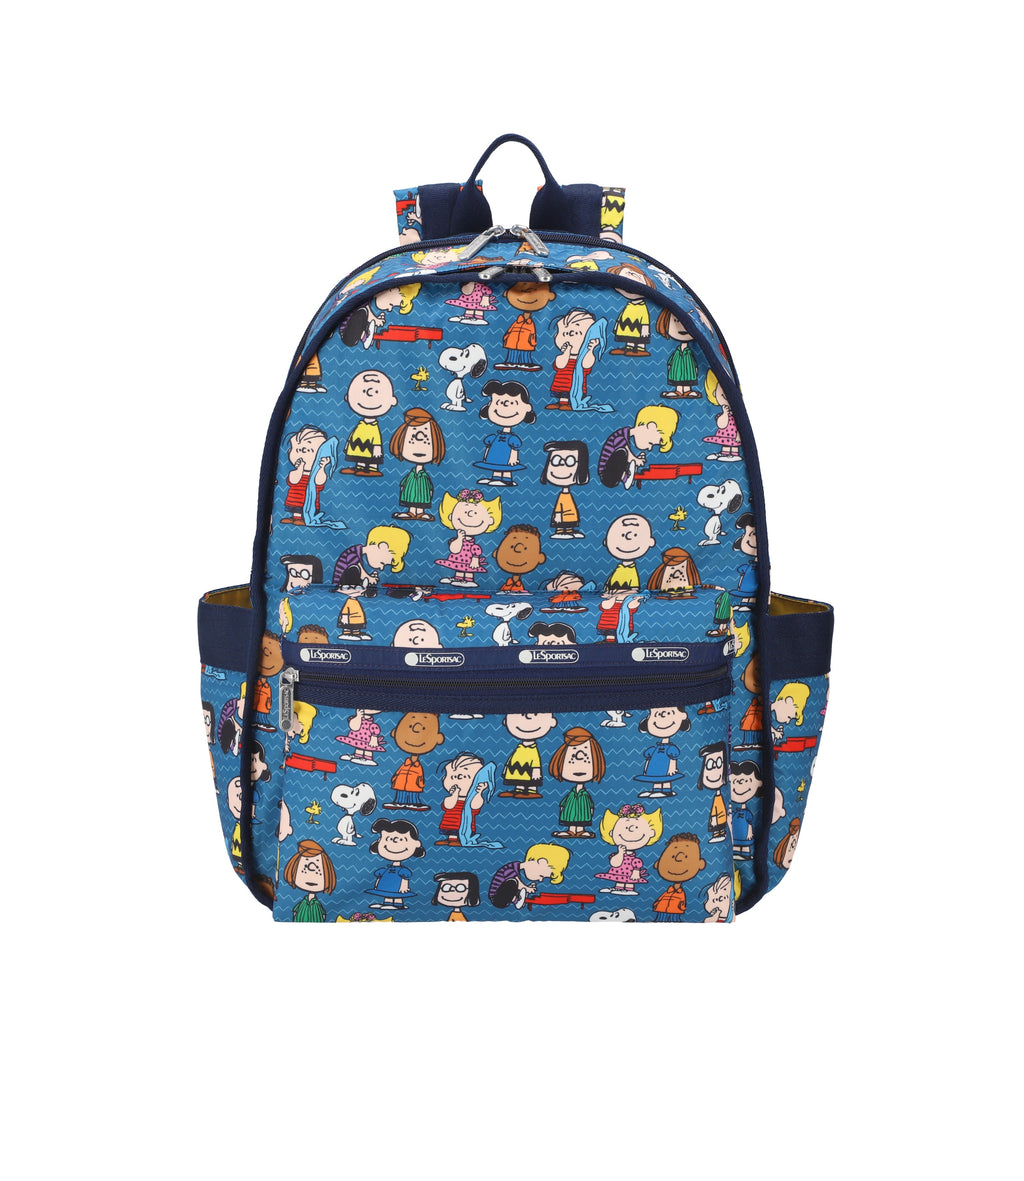 Route Backpack - 24545271185456